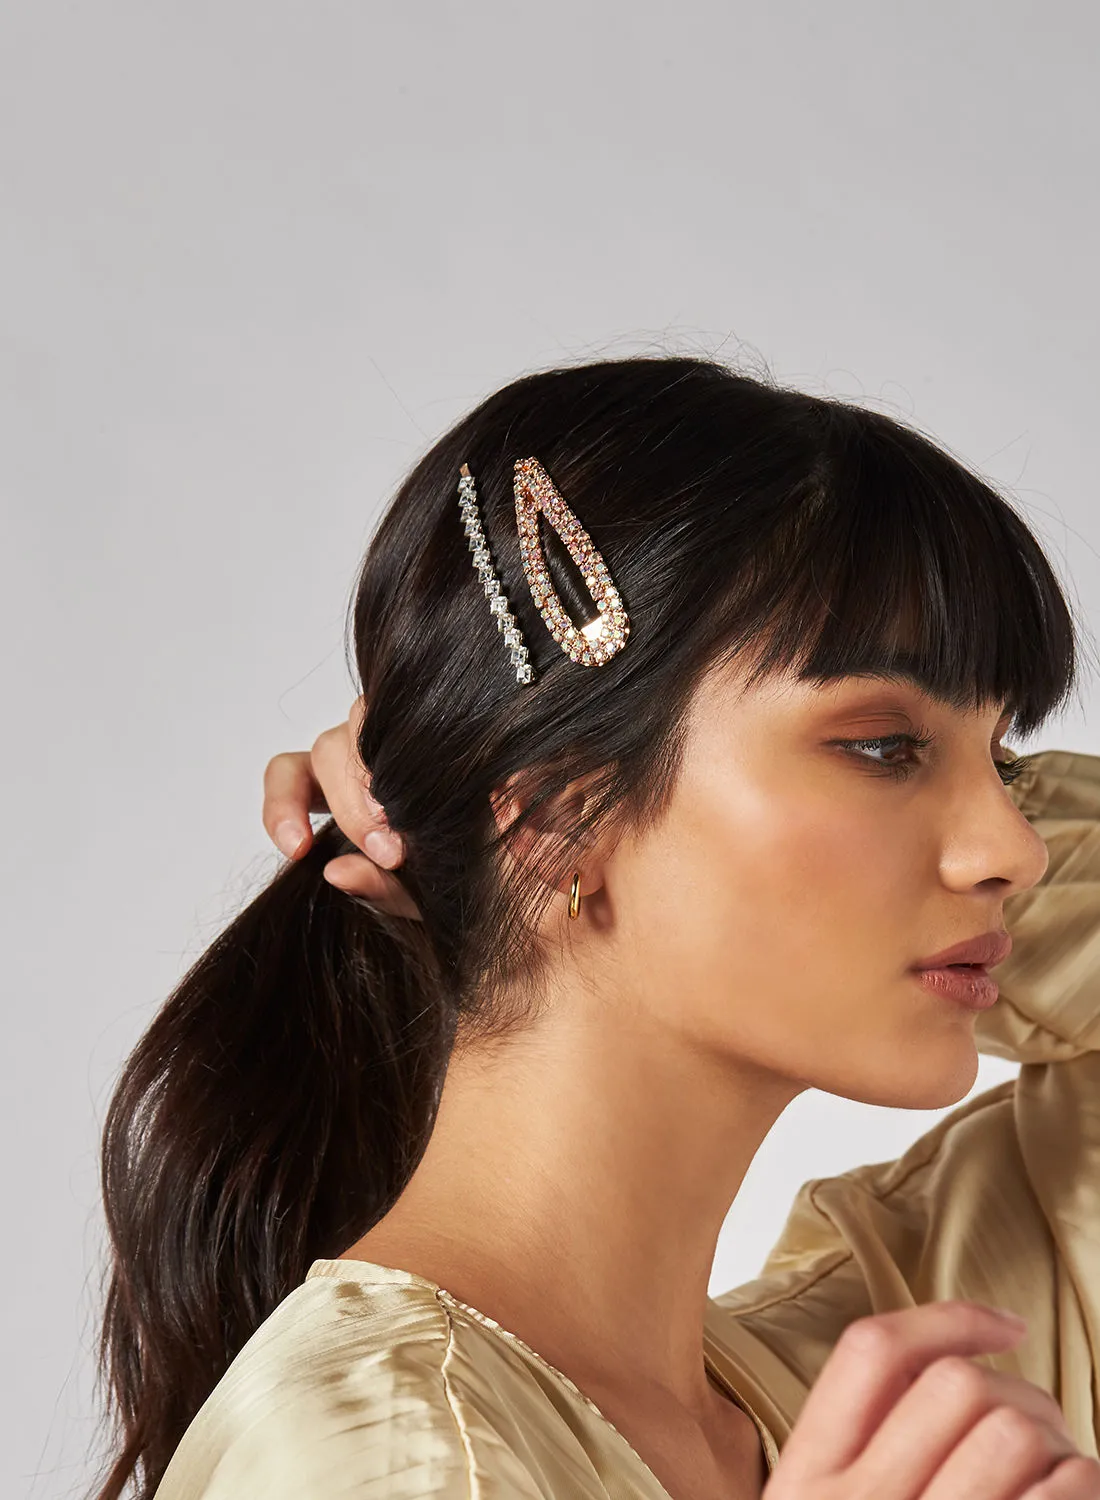 VERO MODA Embellished Hairclips (Pack of 4) 